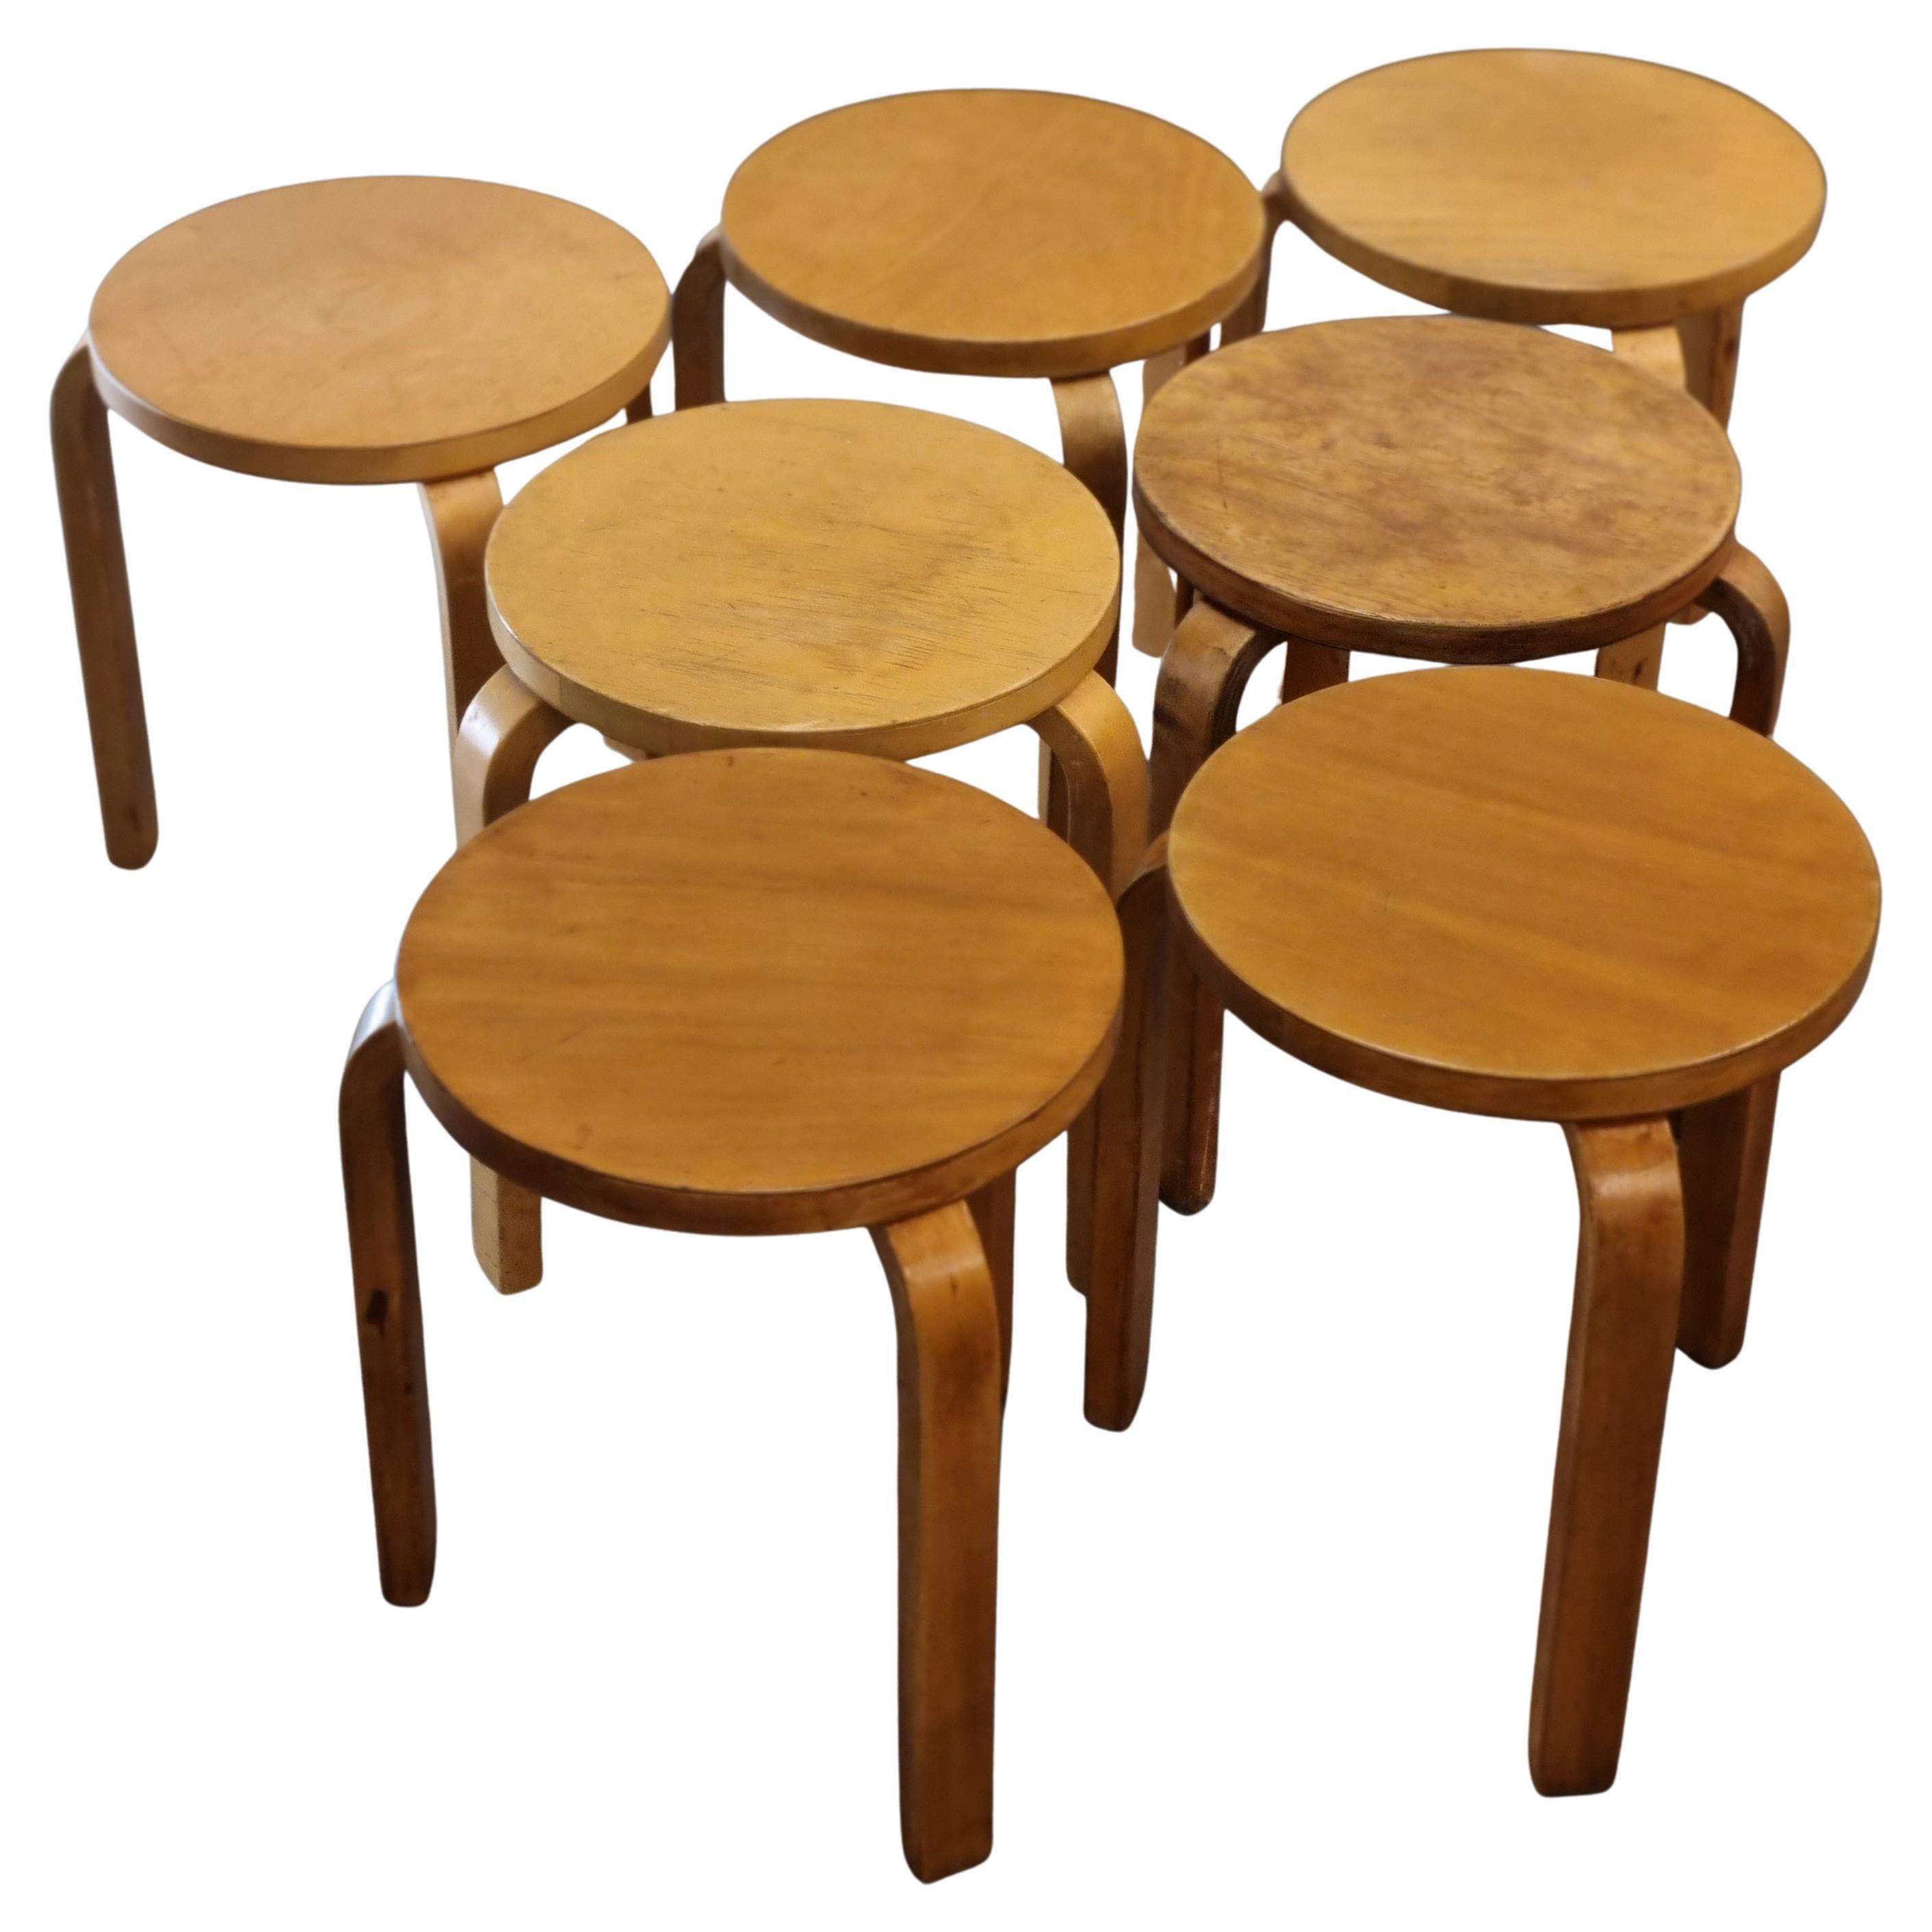 These seven Alvar Aalto iconic stools from 1930s are beautiful and space saving furniture pieces of timeless design. The legs are mounted directly to the underside of the round seat without the need for complicated connecting elements. The stools